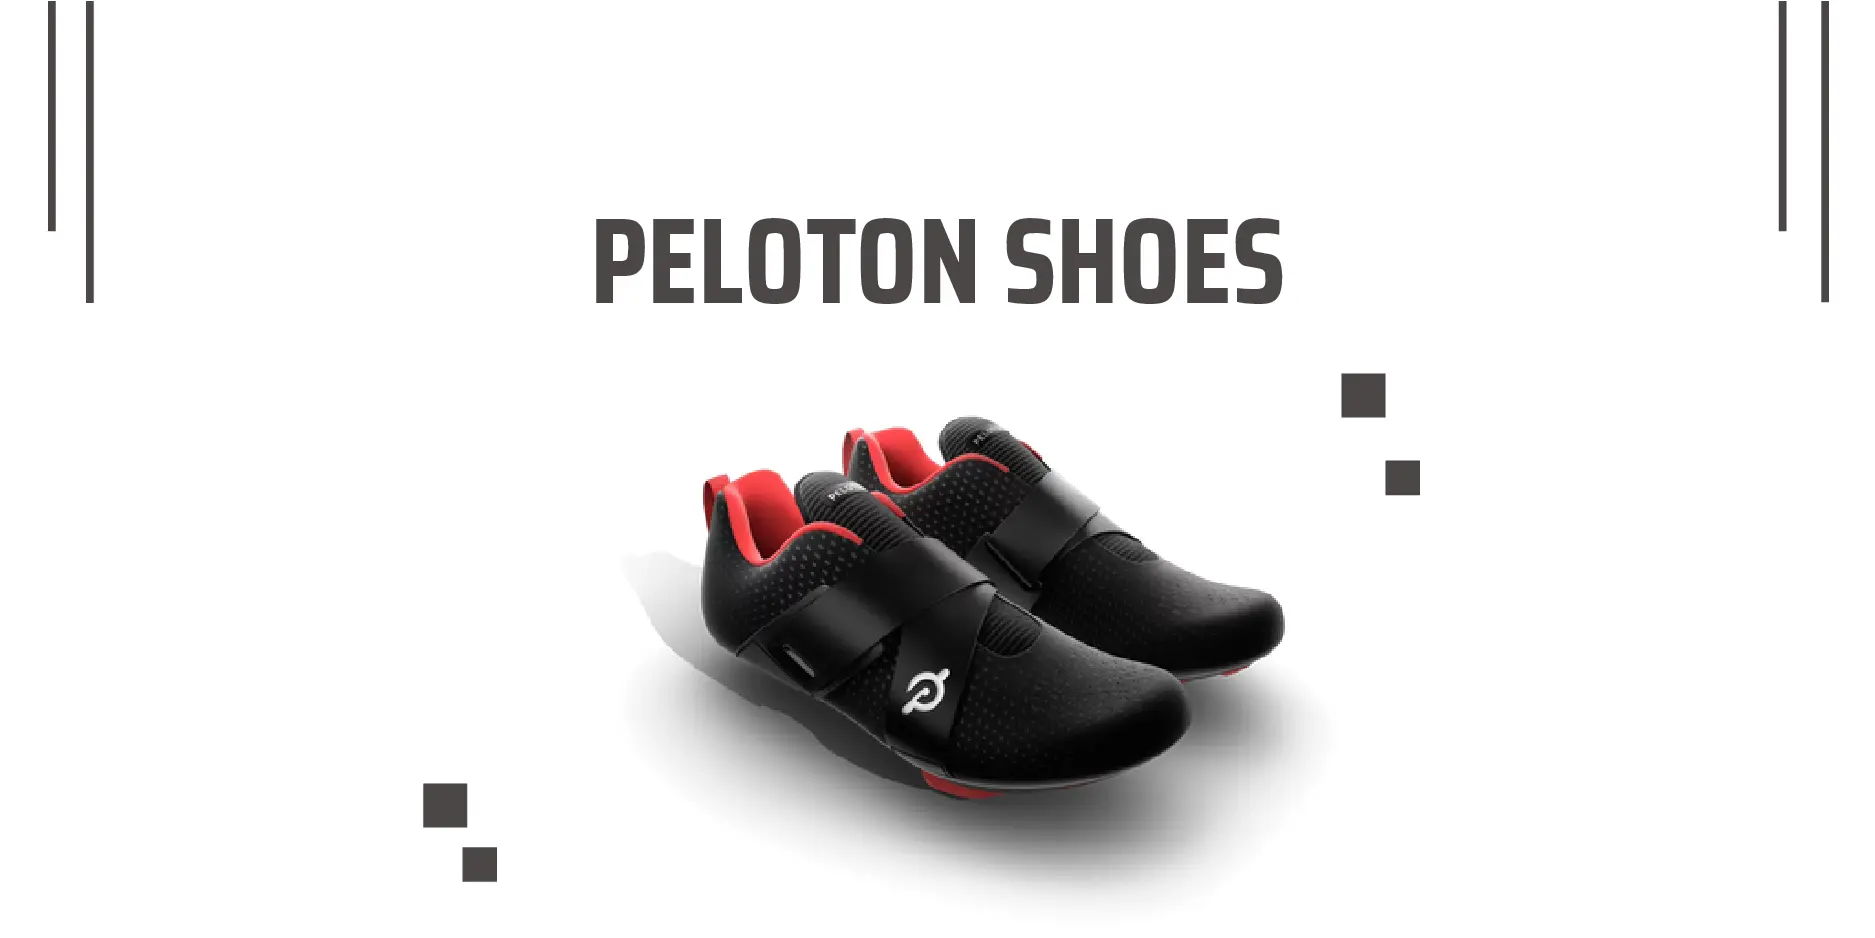 What You Should Know Before You Buy Peloton Shoes